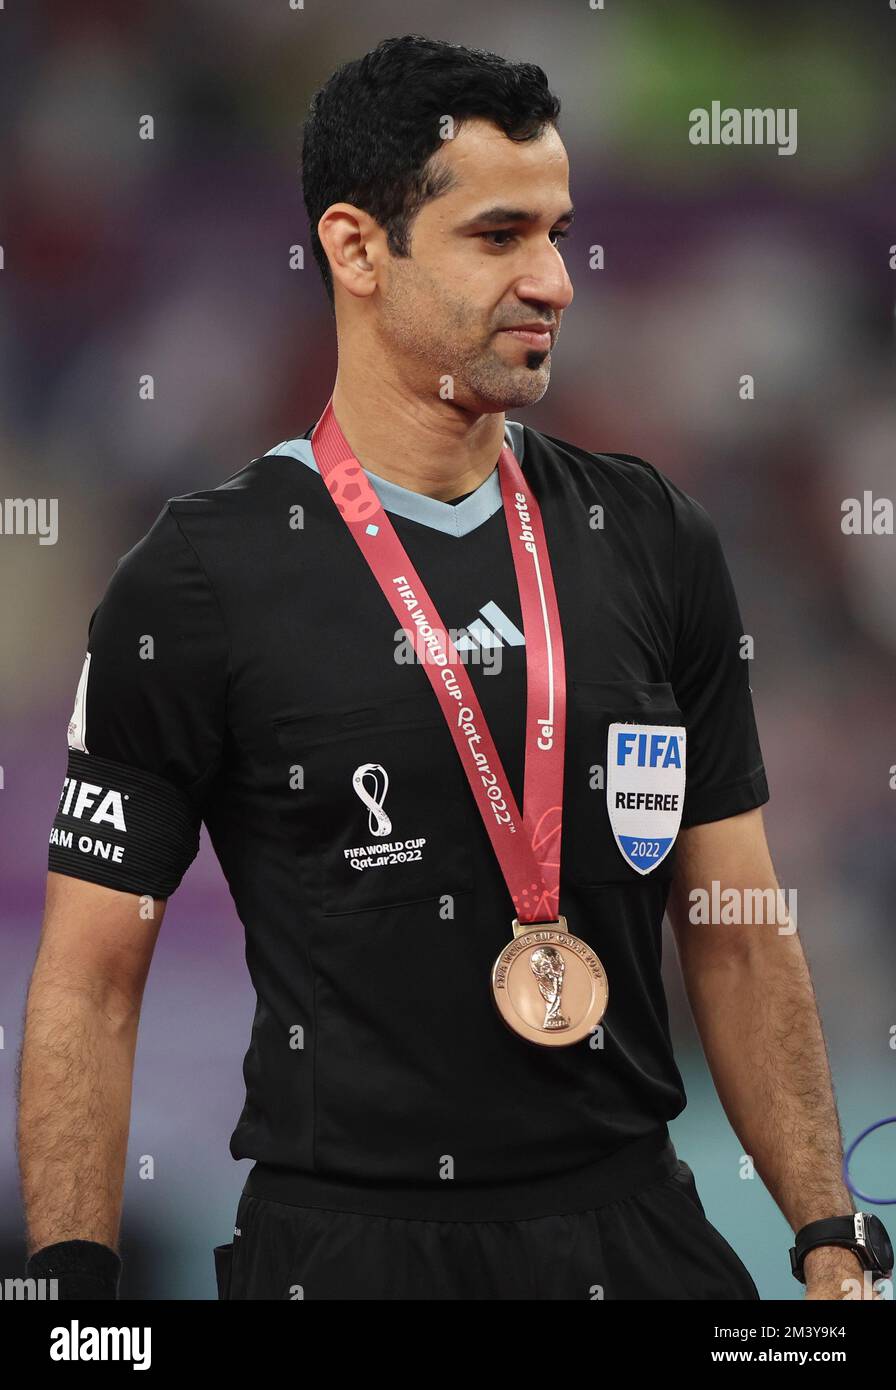 Doha, Qatar. 17th Dec, 2022. Referee Abdulrahman Al Jassim poses with a medal after the third place play-off match between Croatia and Morocco of the 2022 FIFA World Cup at Khalifa International Stadium in Doha, Qatar, Dec. 17, 2022. Credit: Jia Haocheng/Xinhua/Alamy Live News Stock Photo